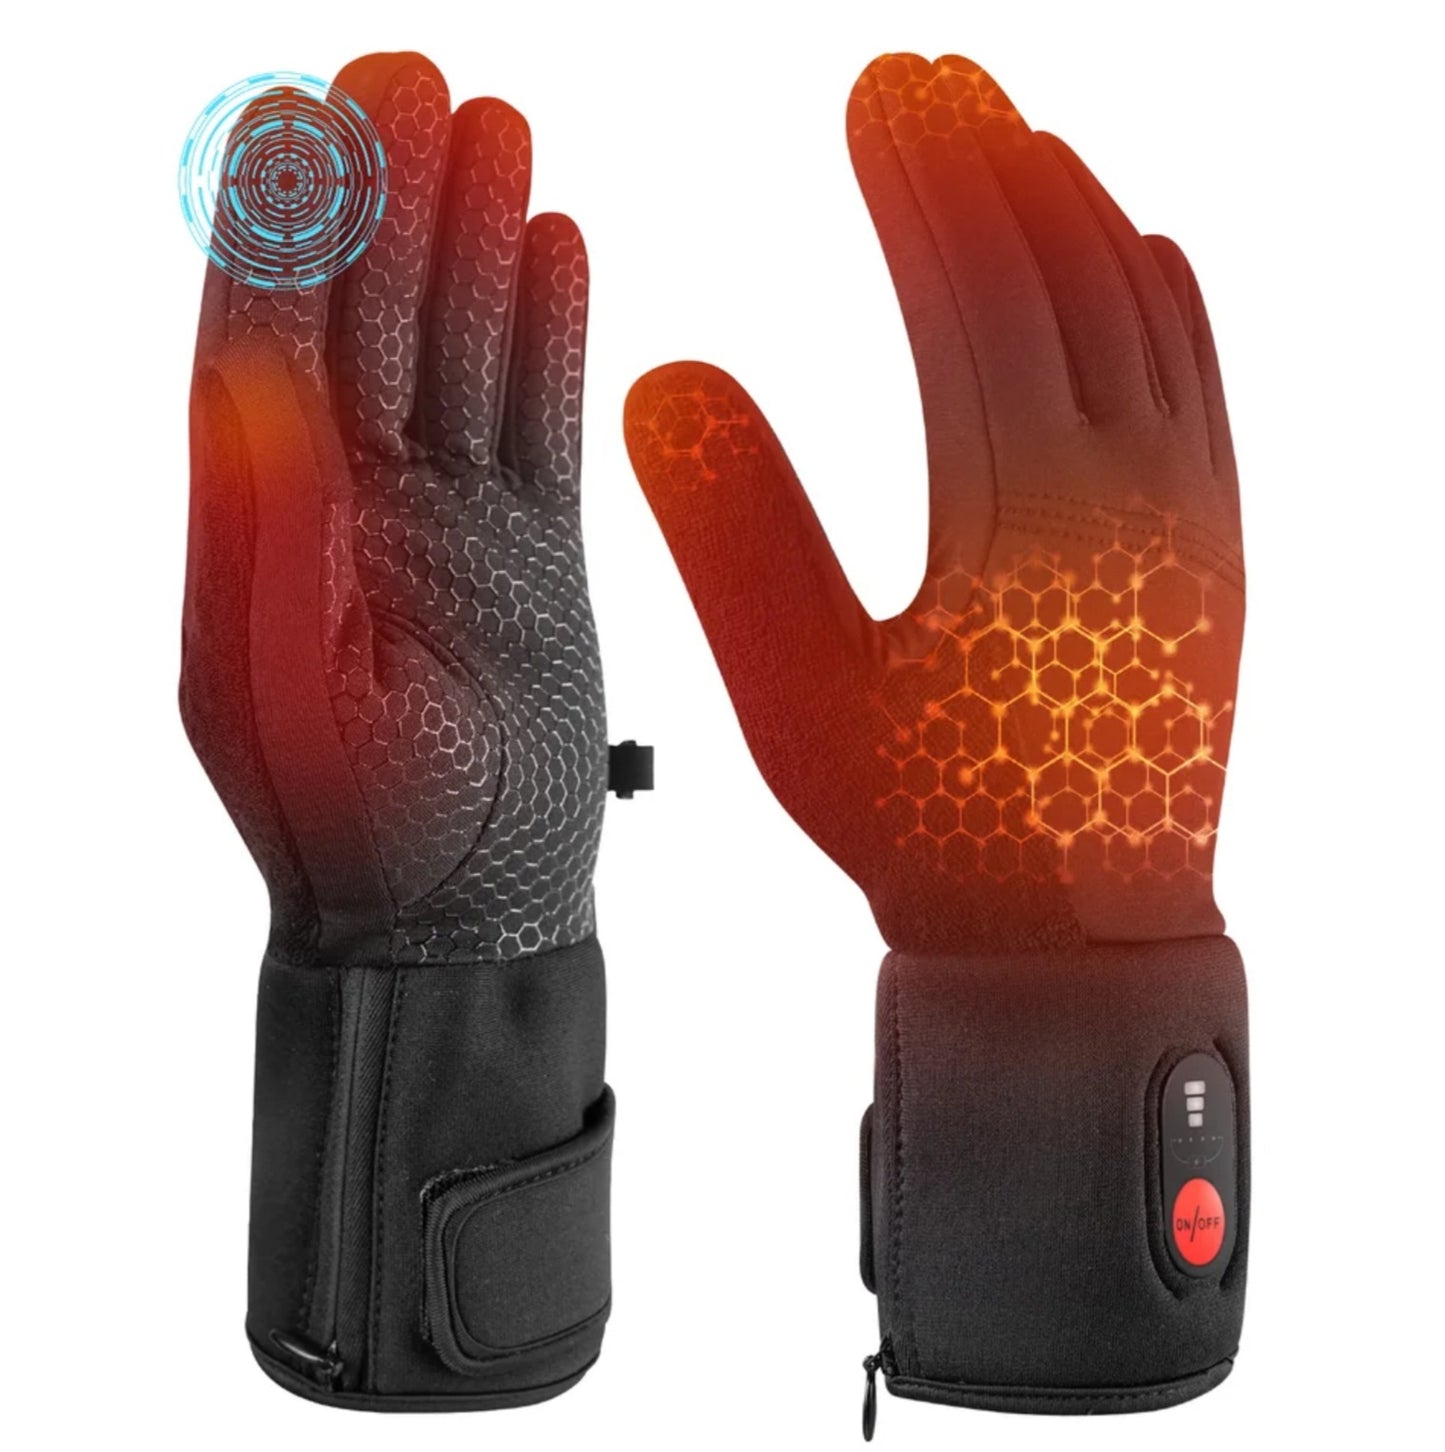 IcePro1 Electric Heated Gloves Battery Liners CE, FCC, PSE Certified